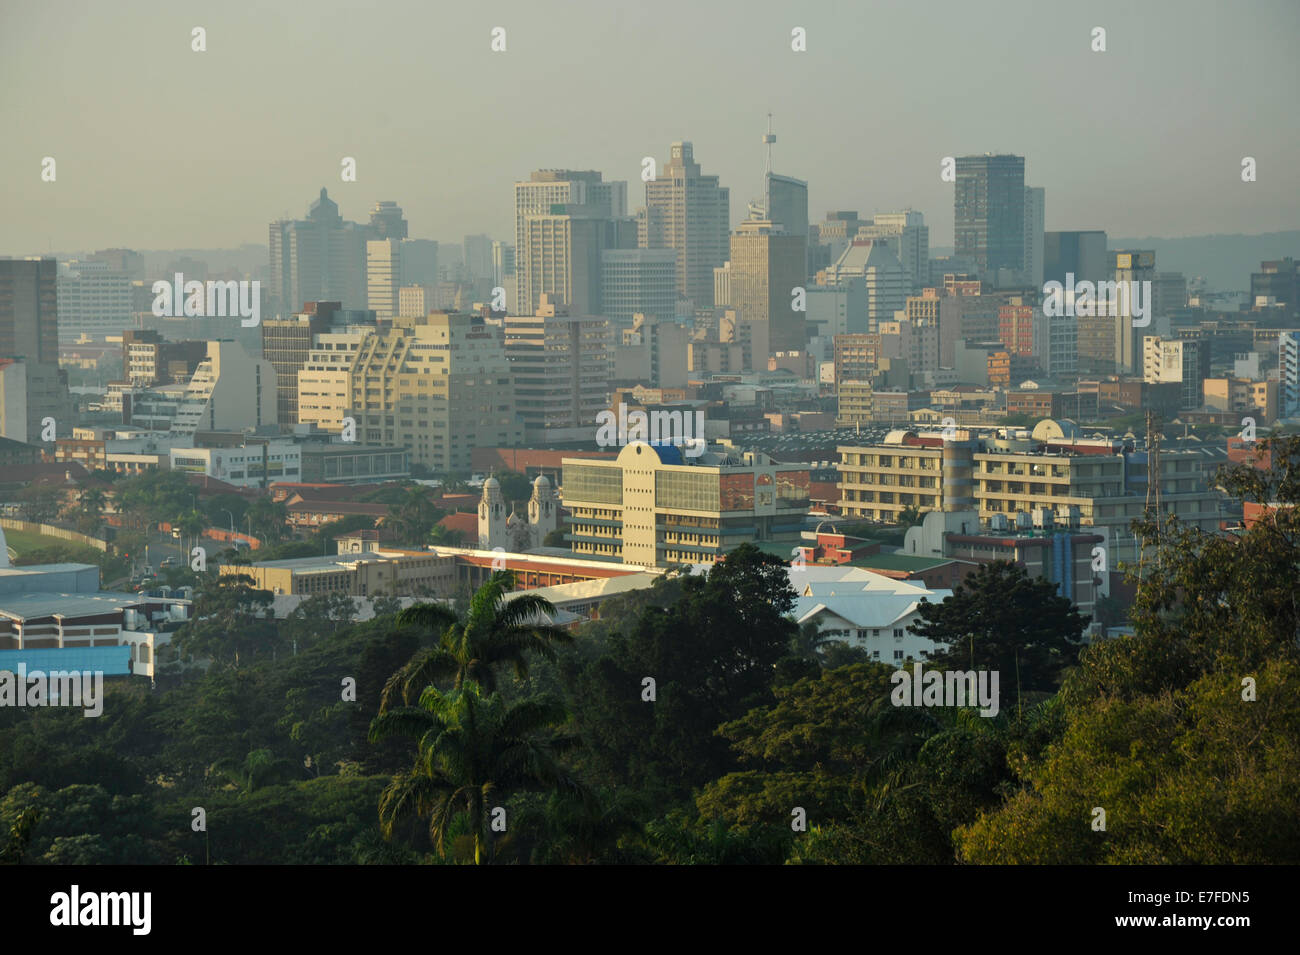 World city, Durban, KwaZulu-Natal, South Africa, early morning skyline. downtown, high rise buildings, landscape, travel destination Stock Photo